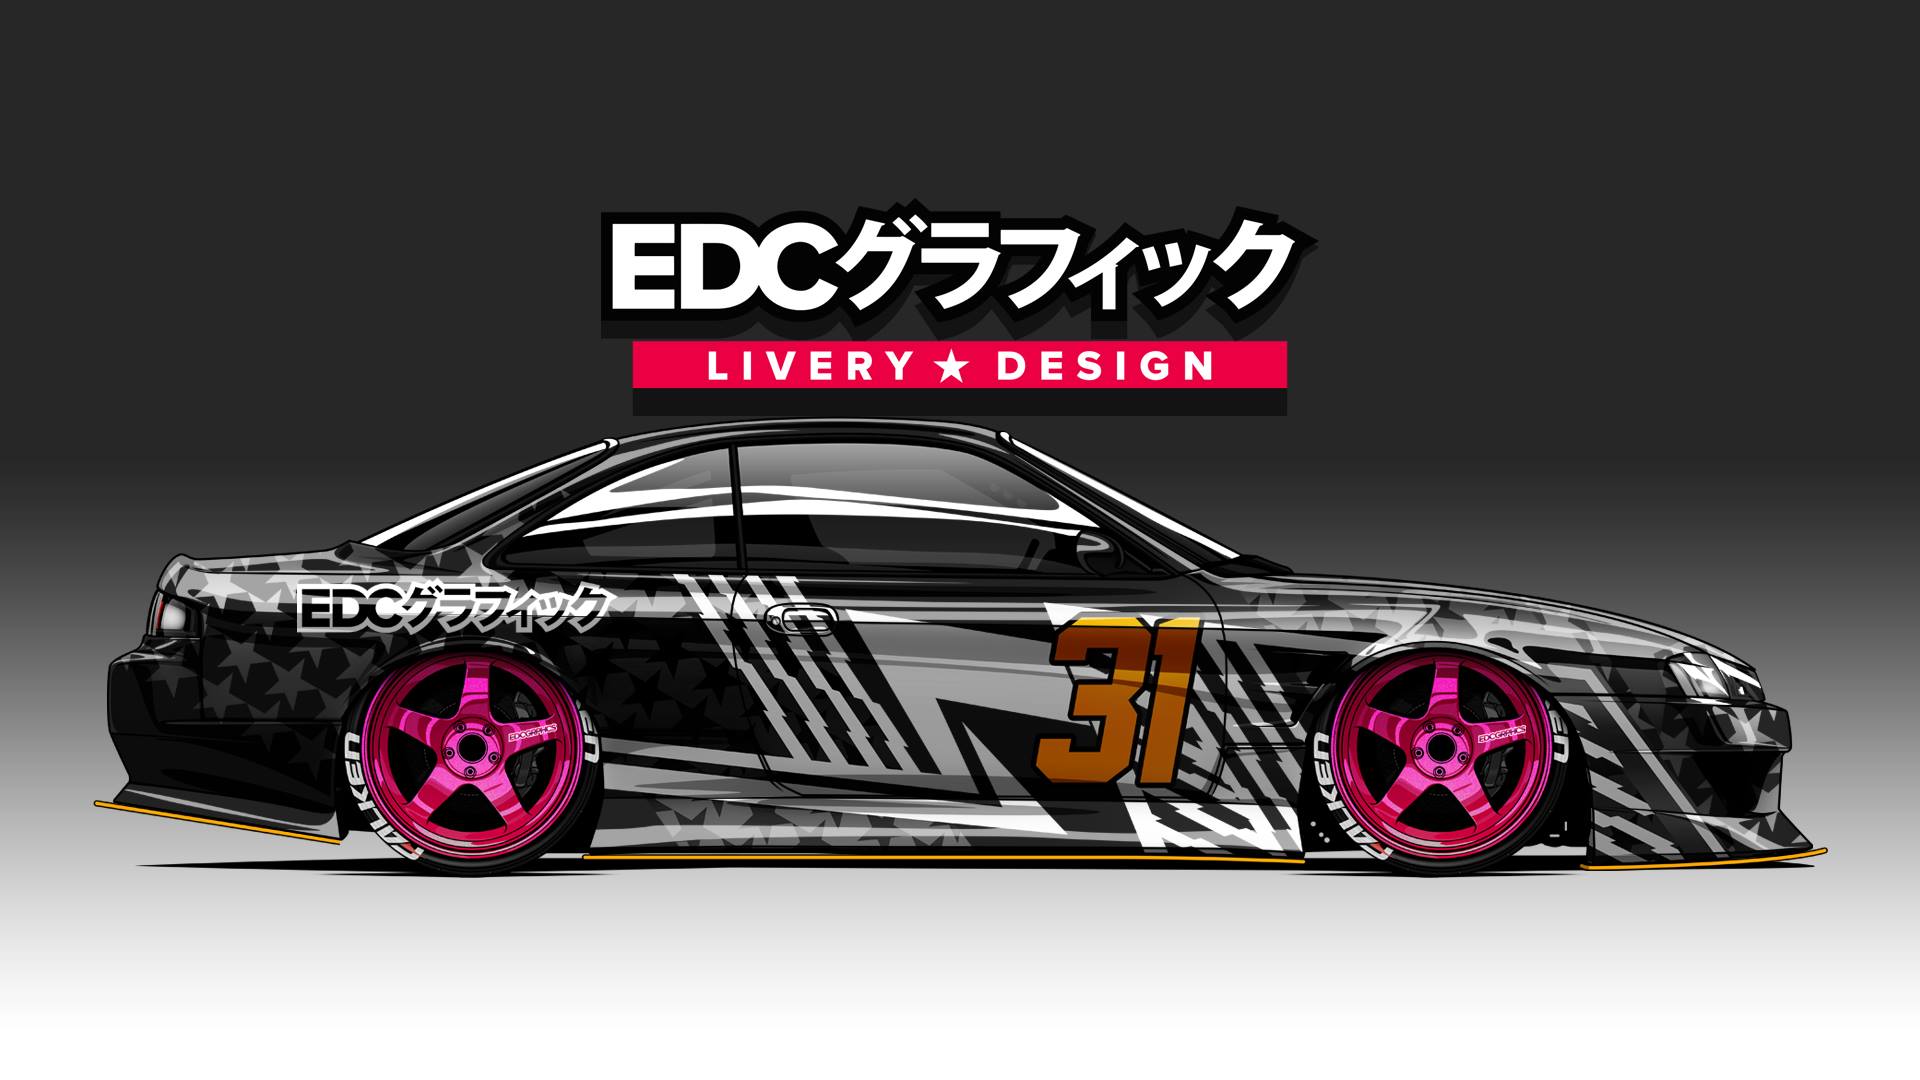 General 1920x1080 EDC Graphics Nissan 200SX CGI Nissan Japanese cars race cars side view colored wheels